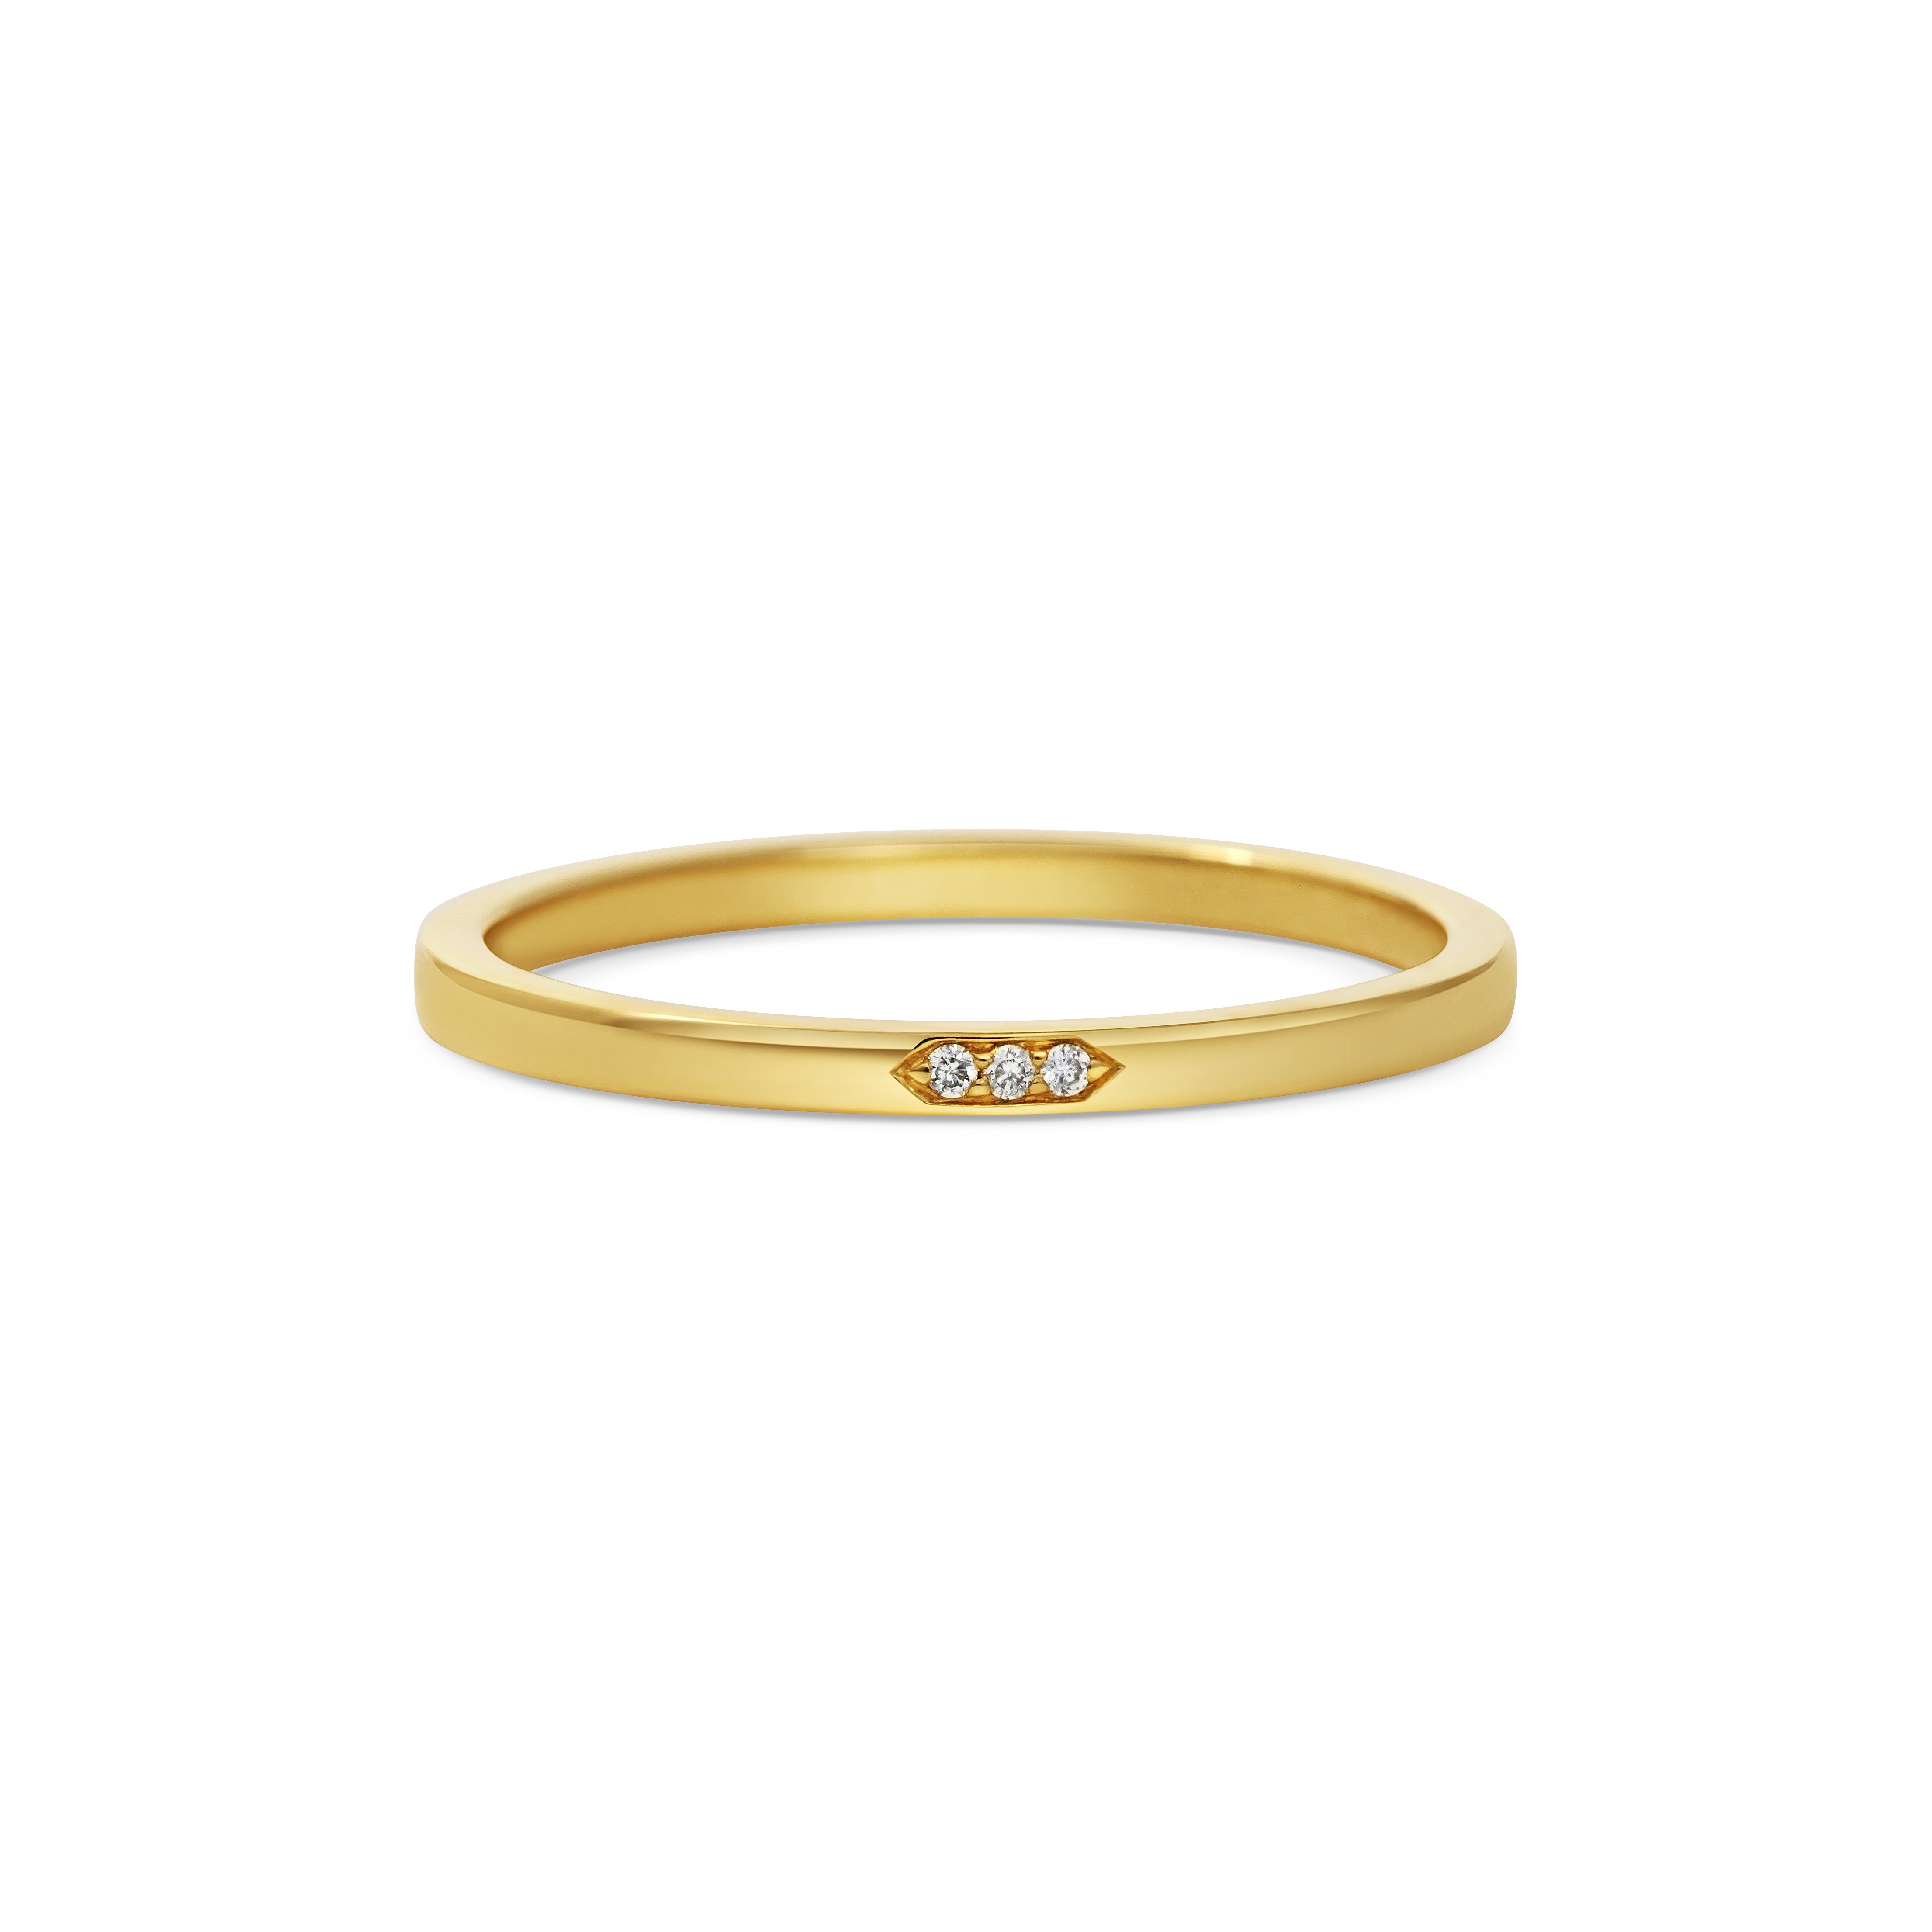 The Tribus Band by East London jeweller Rachel Boston | Discover our collections of unique and timeless engagement rings, wedding rings, and modern fine jewellery.